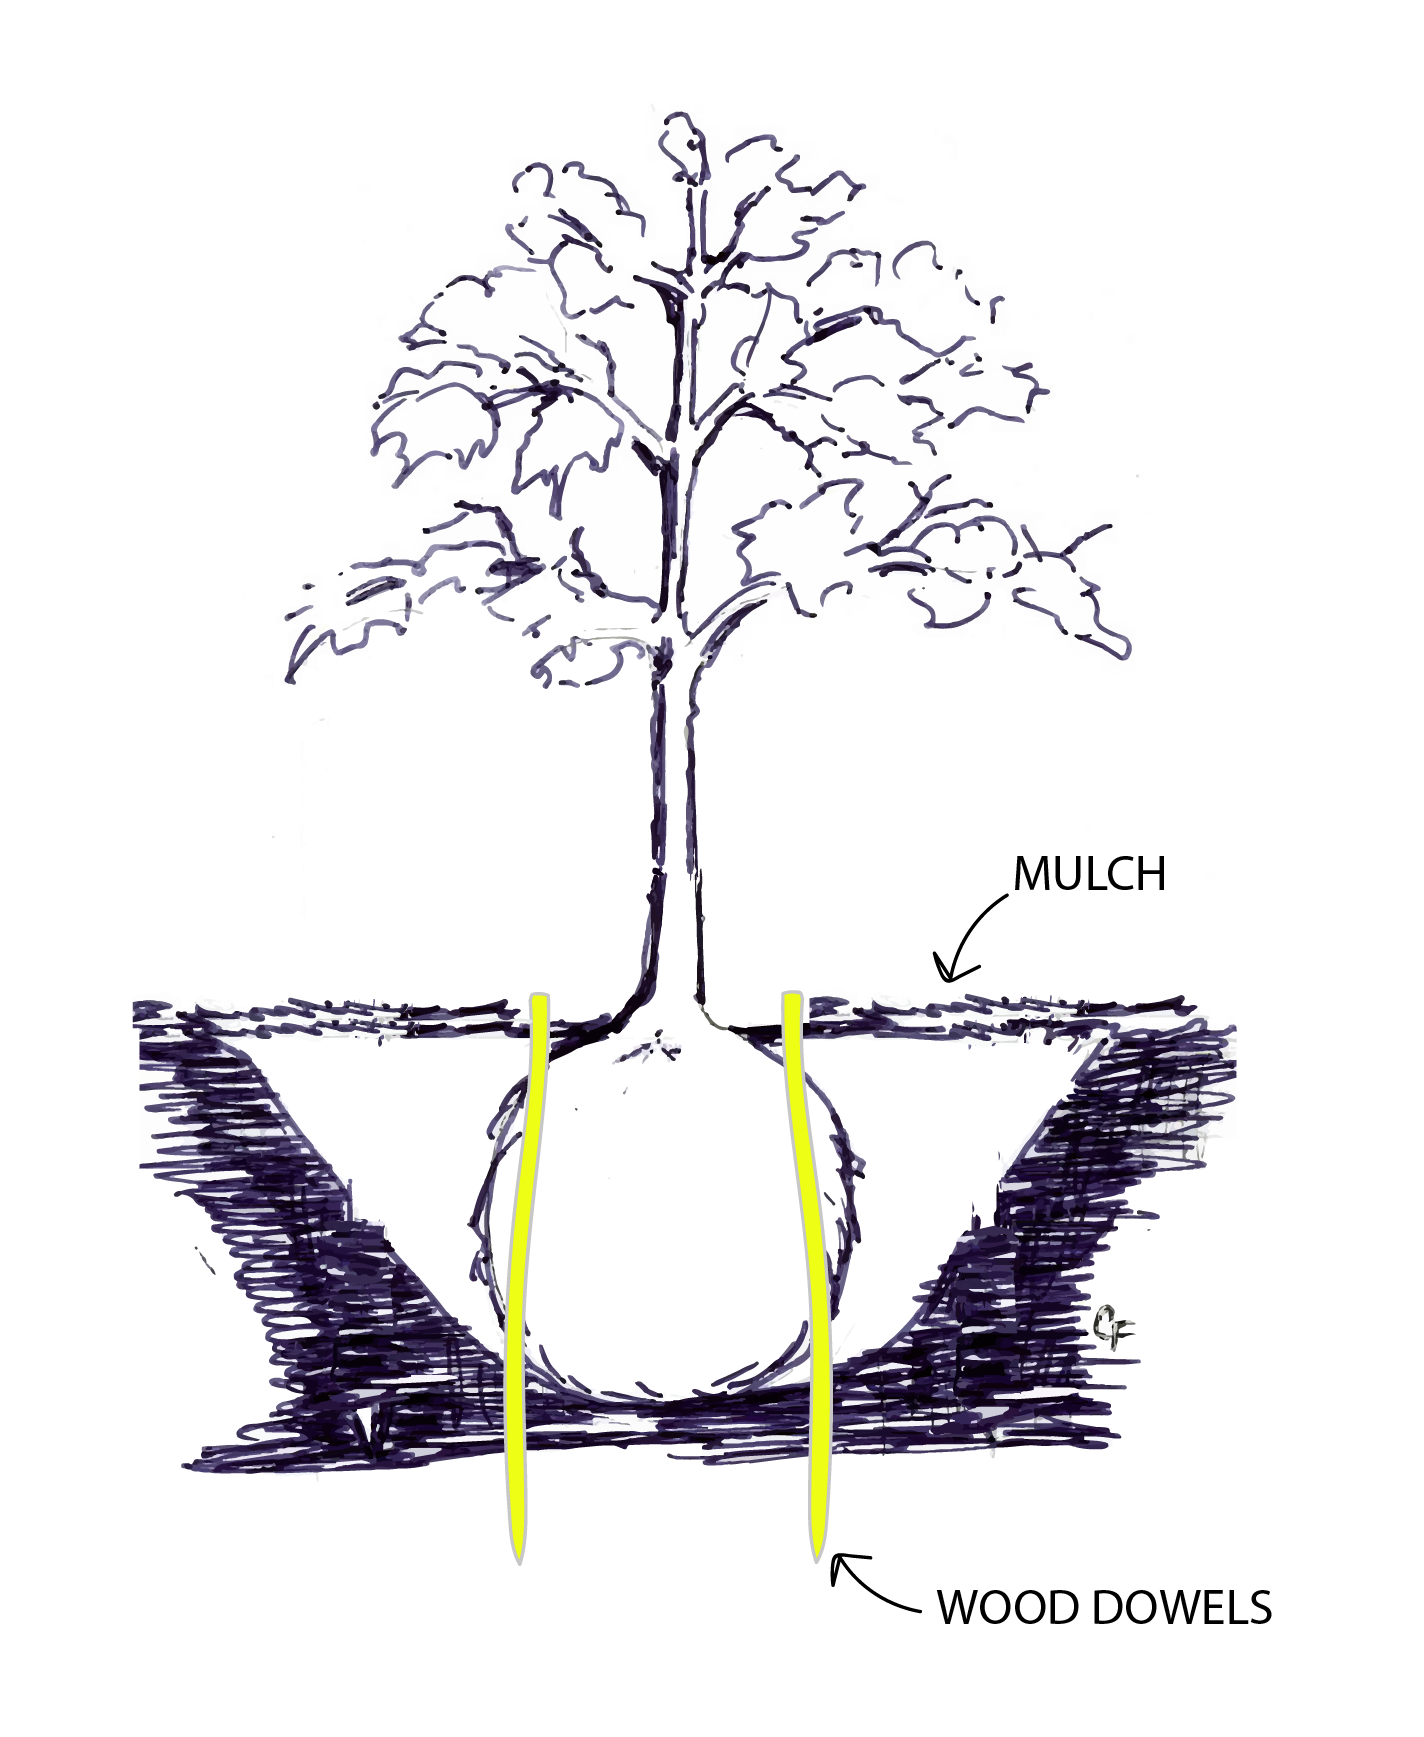 tree planted in a hole with yellow wooden dowels going through the root ball into the soil below